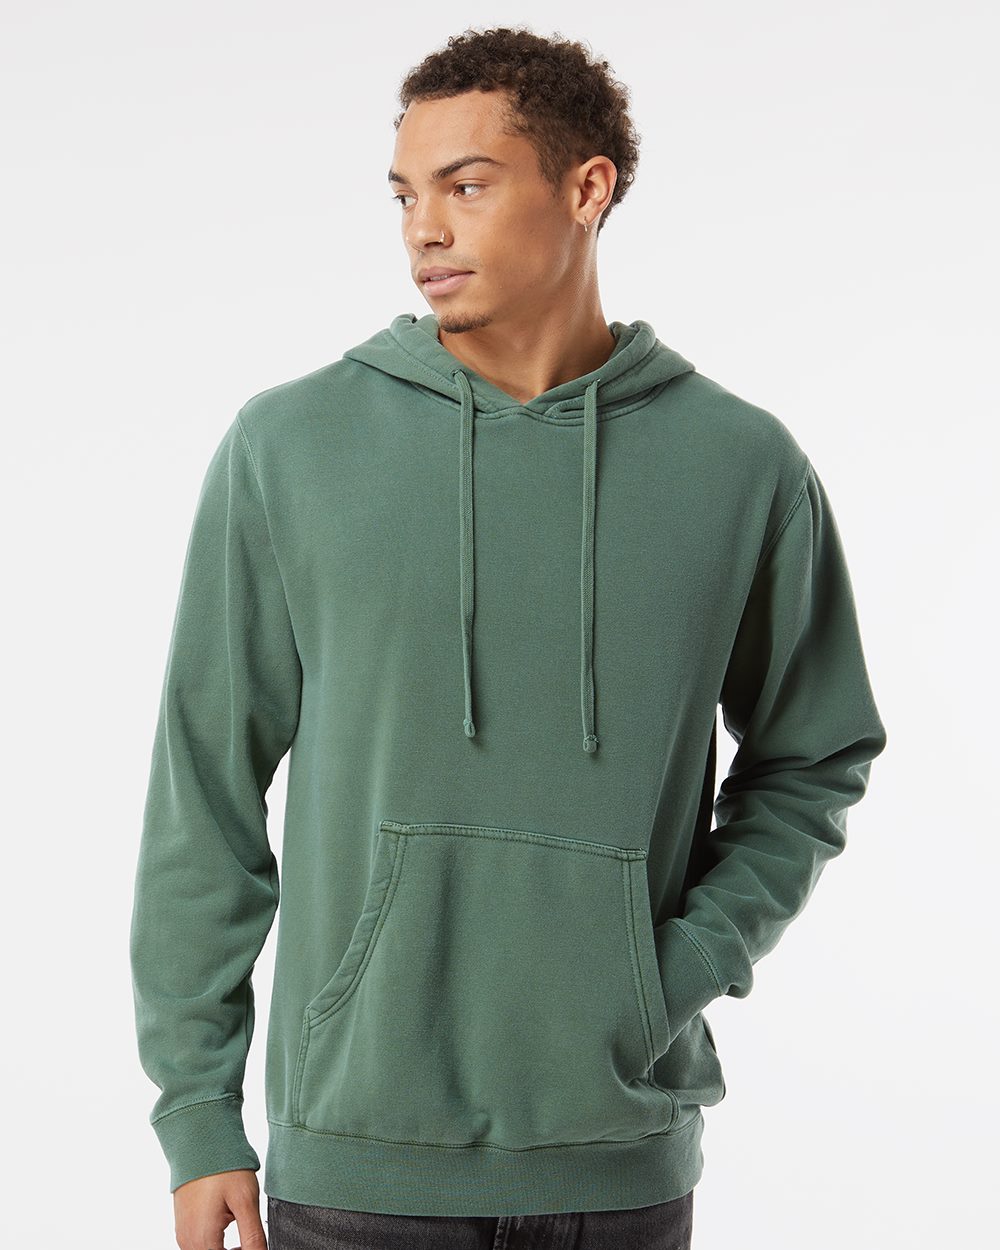 Midweight Pigment-Dyed Hooded Sweatshirt - Independent Trading Co. PRM4500